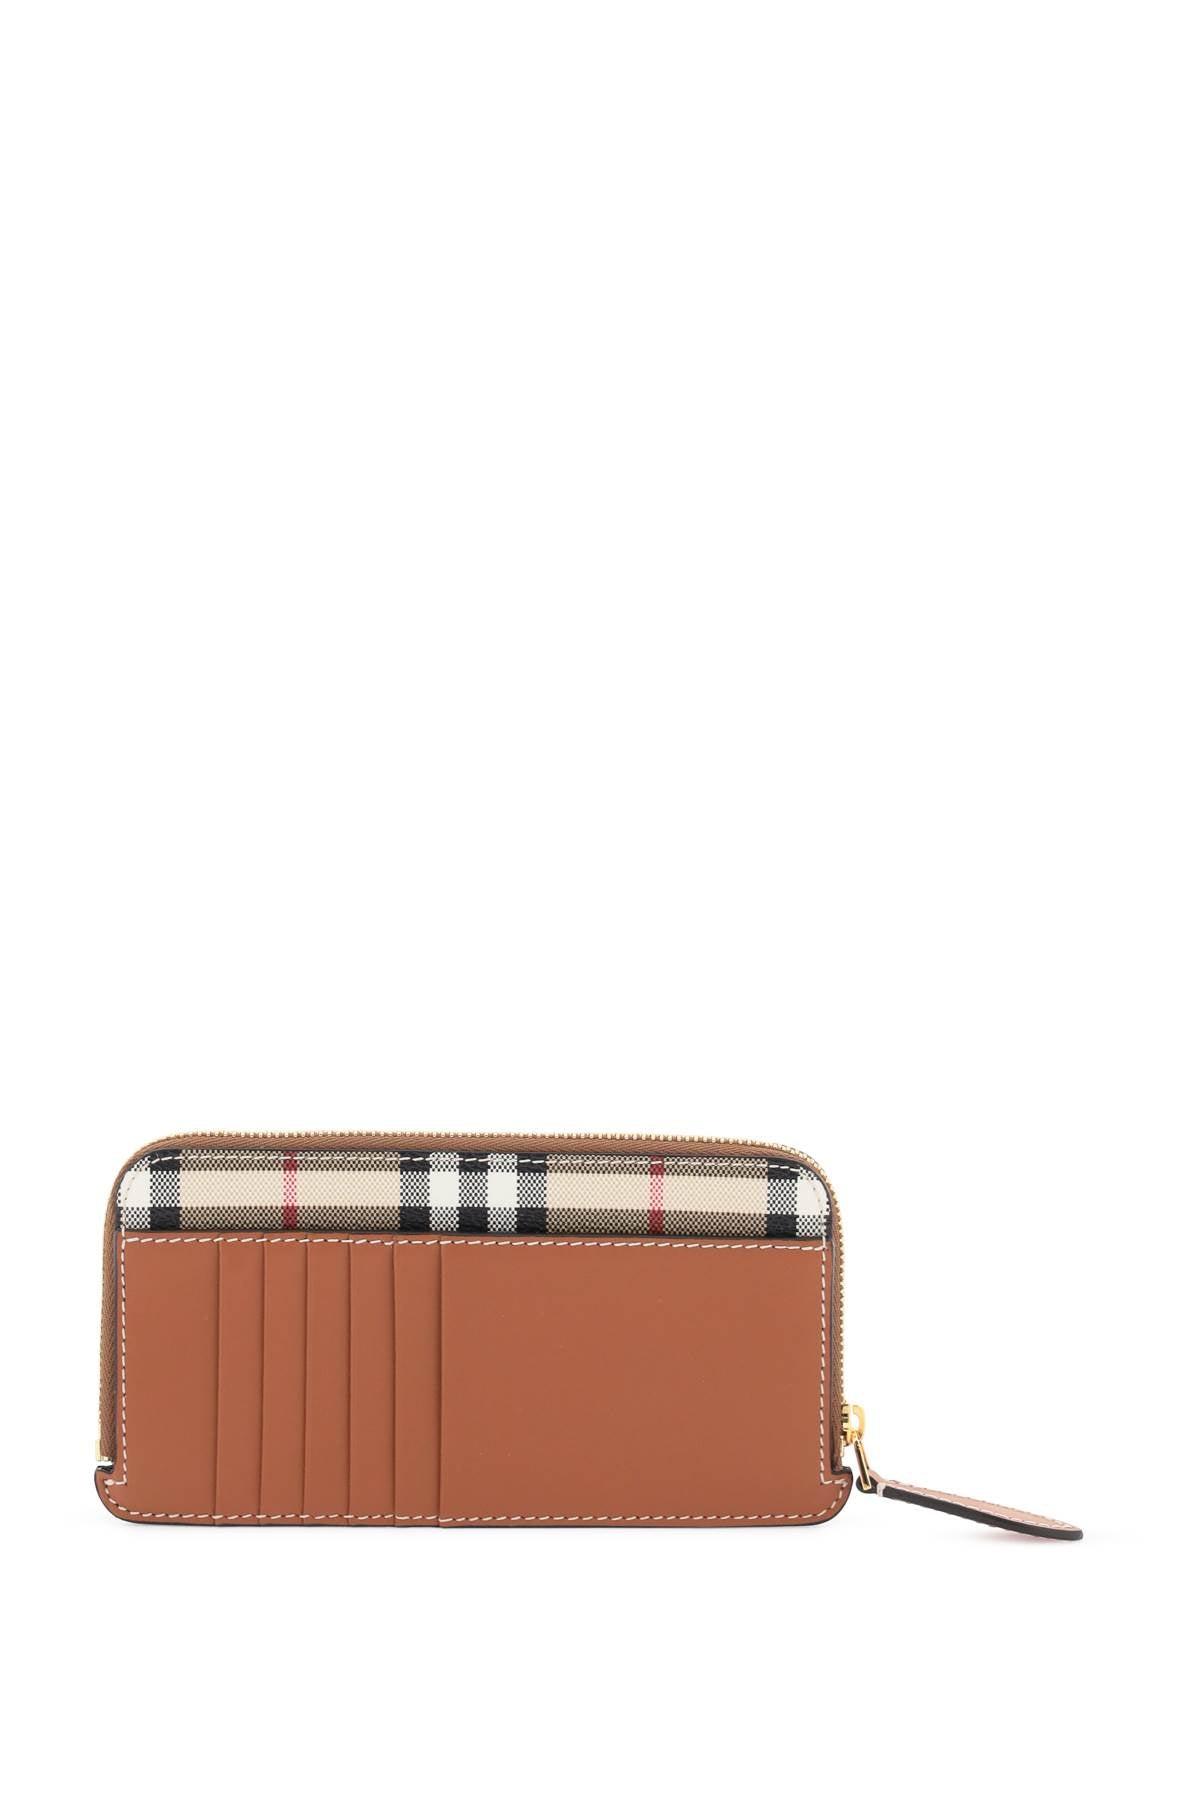 Burberry Check Faux Leather Wallet   Marrone